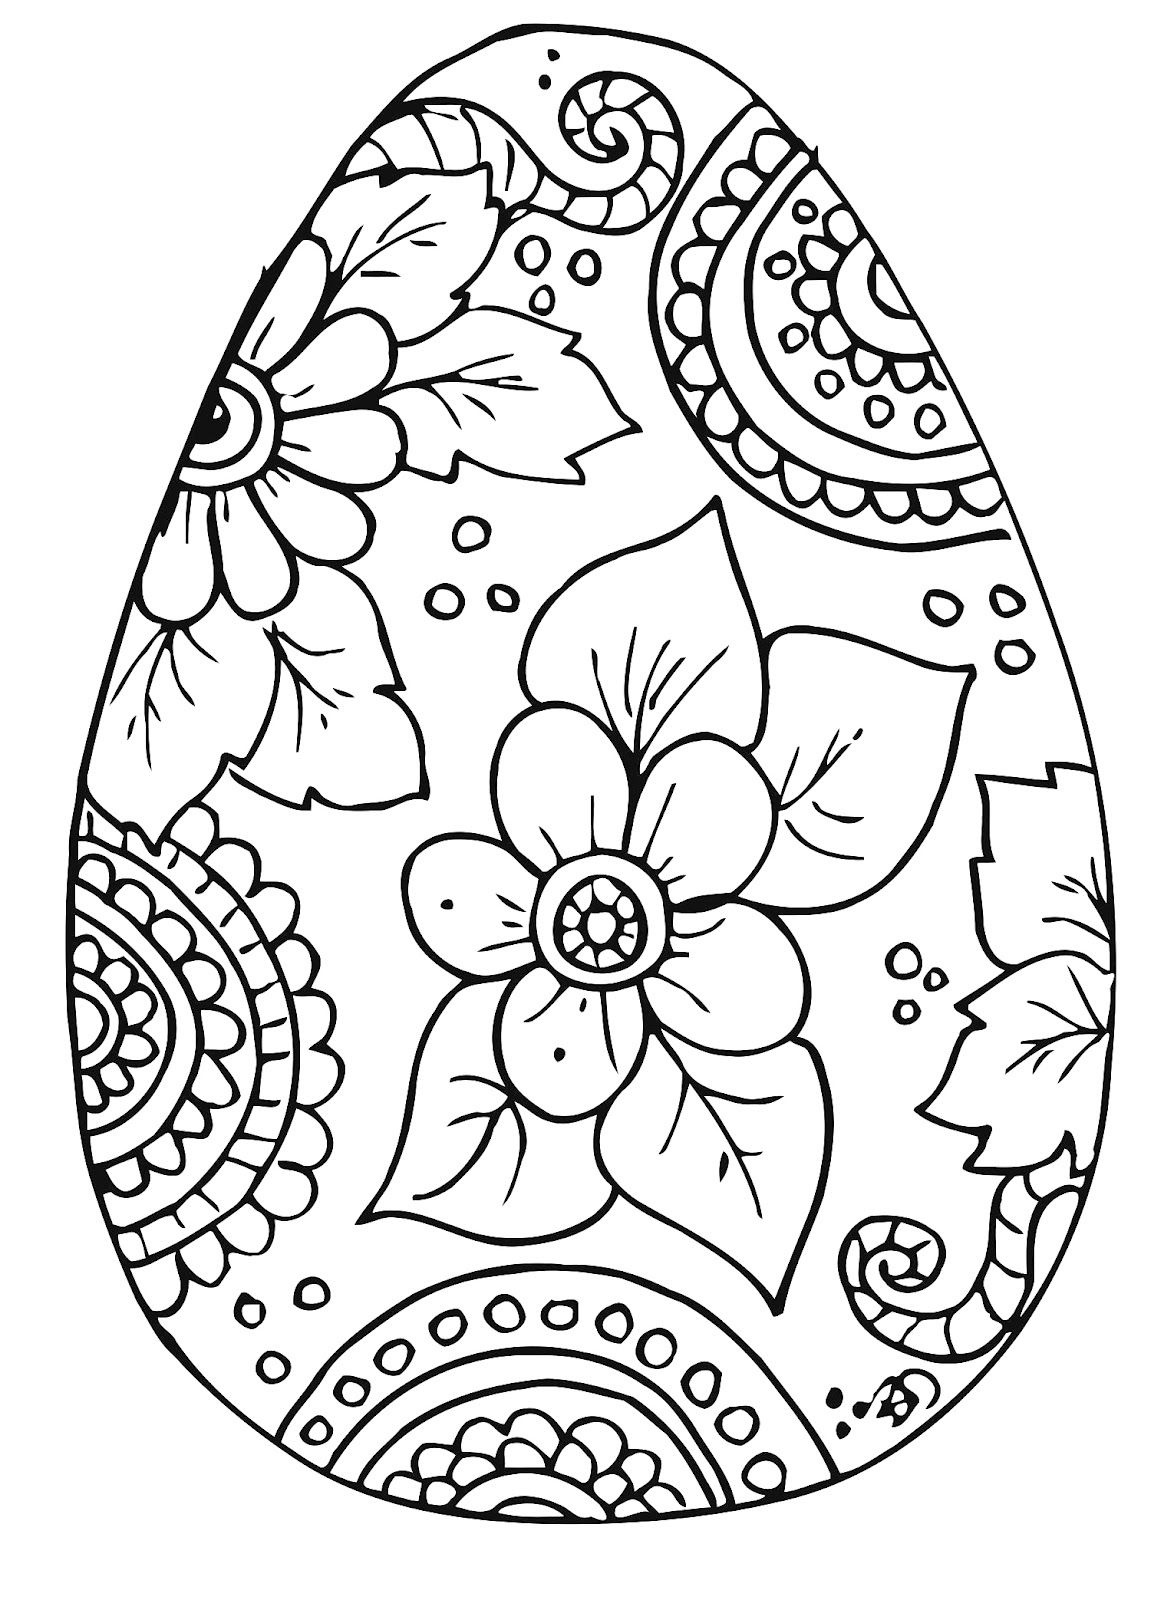 10 Cool Free Printable Easter Coloring Pages For Kids Who&amp;#039;ve Moved - Free Printable Easter Coloring Pages